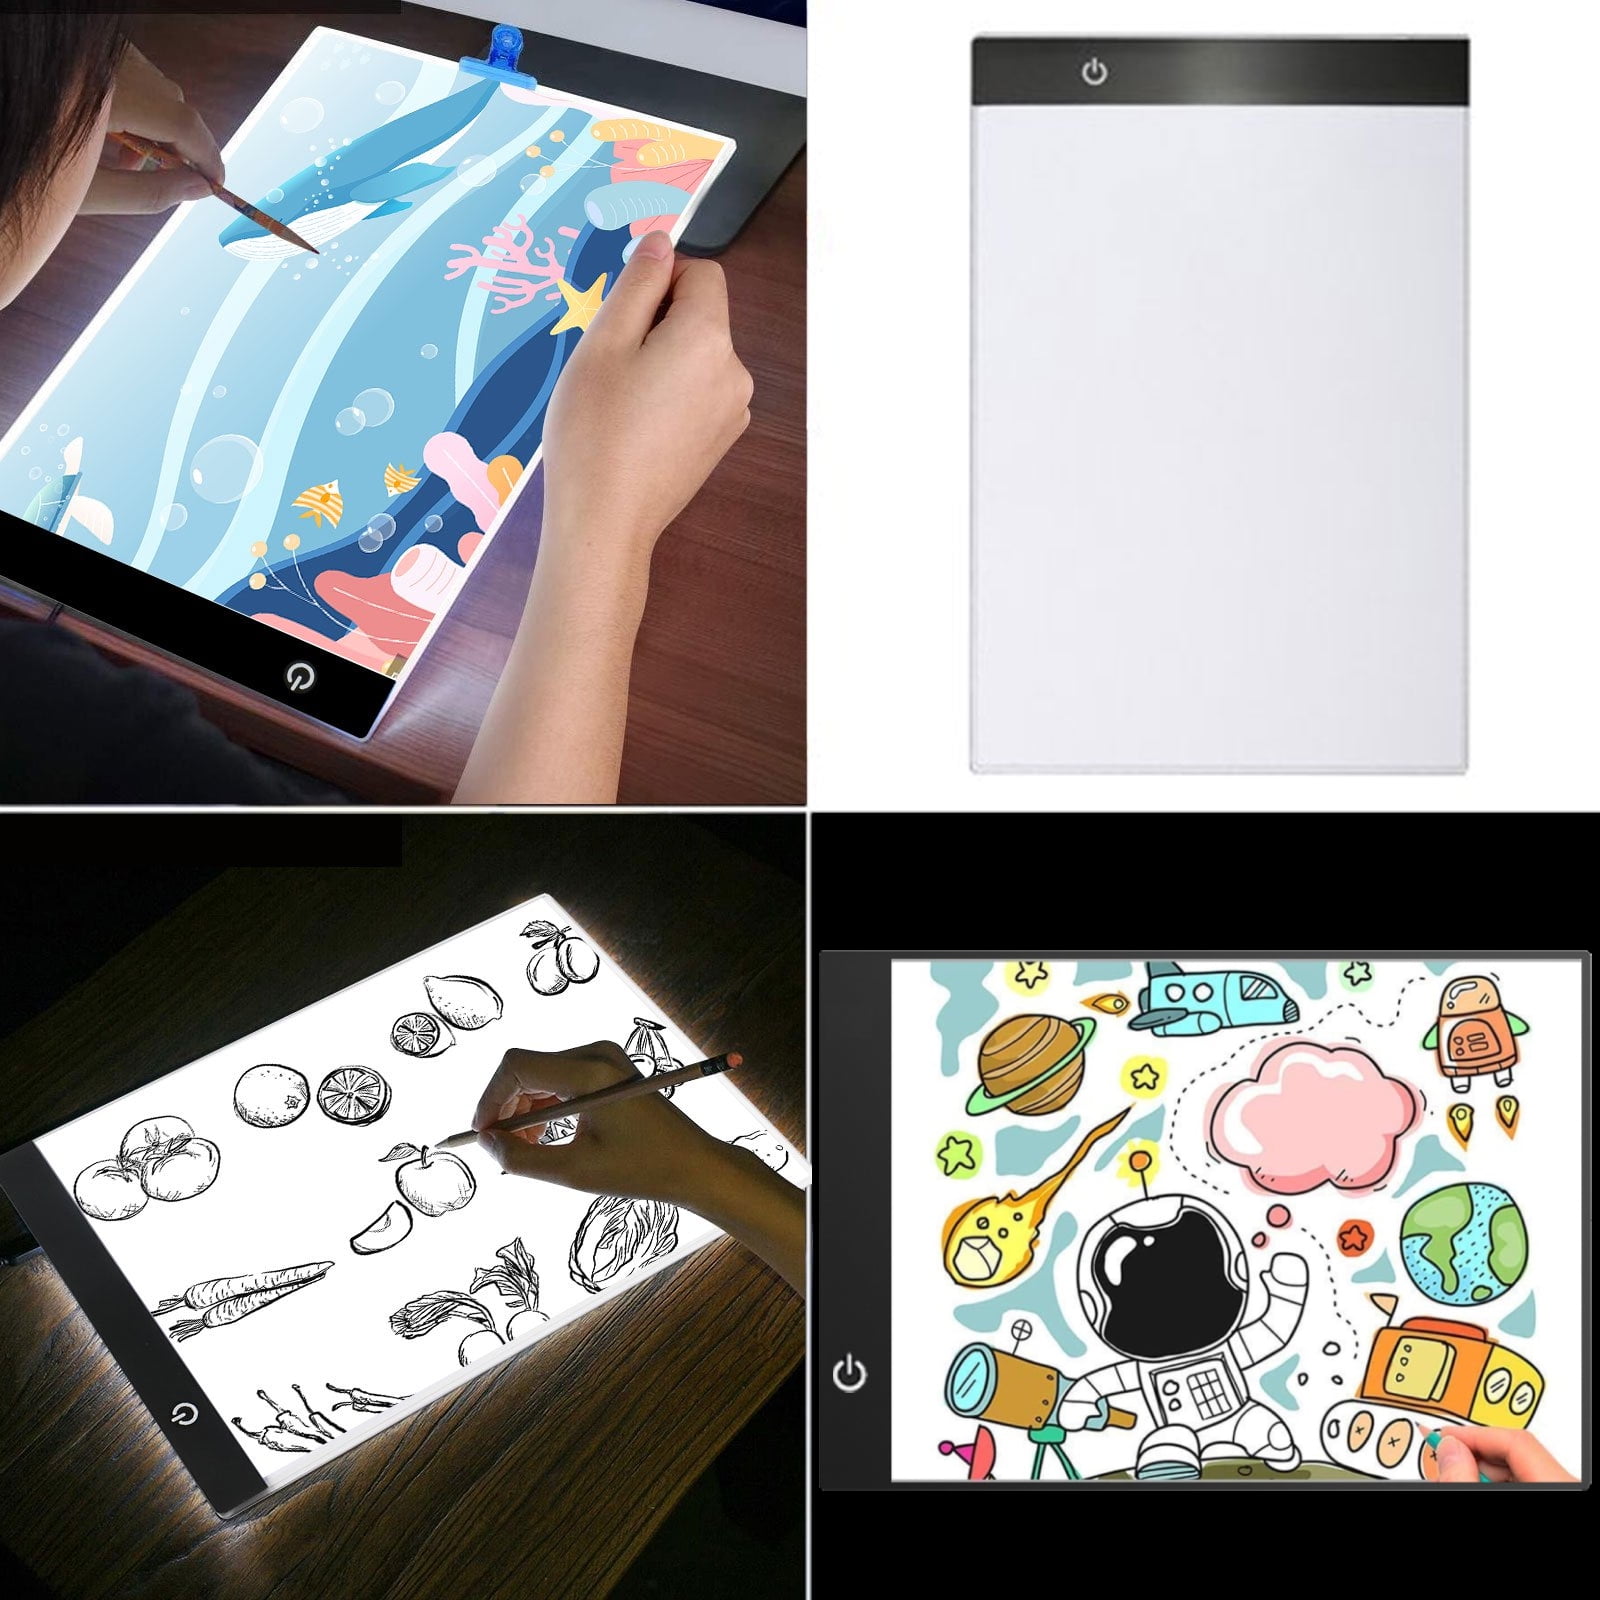 Light Pad,NXENTC A4 Ultra-Thin Portable LED Bright Pad Magnetic Tracing Light Box with USB Powered for Artists Drawing Weeding Vinyl DIY Diamond Painting Sketching Tattoo Animation Designing Silver 